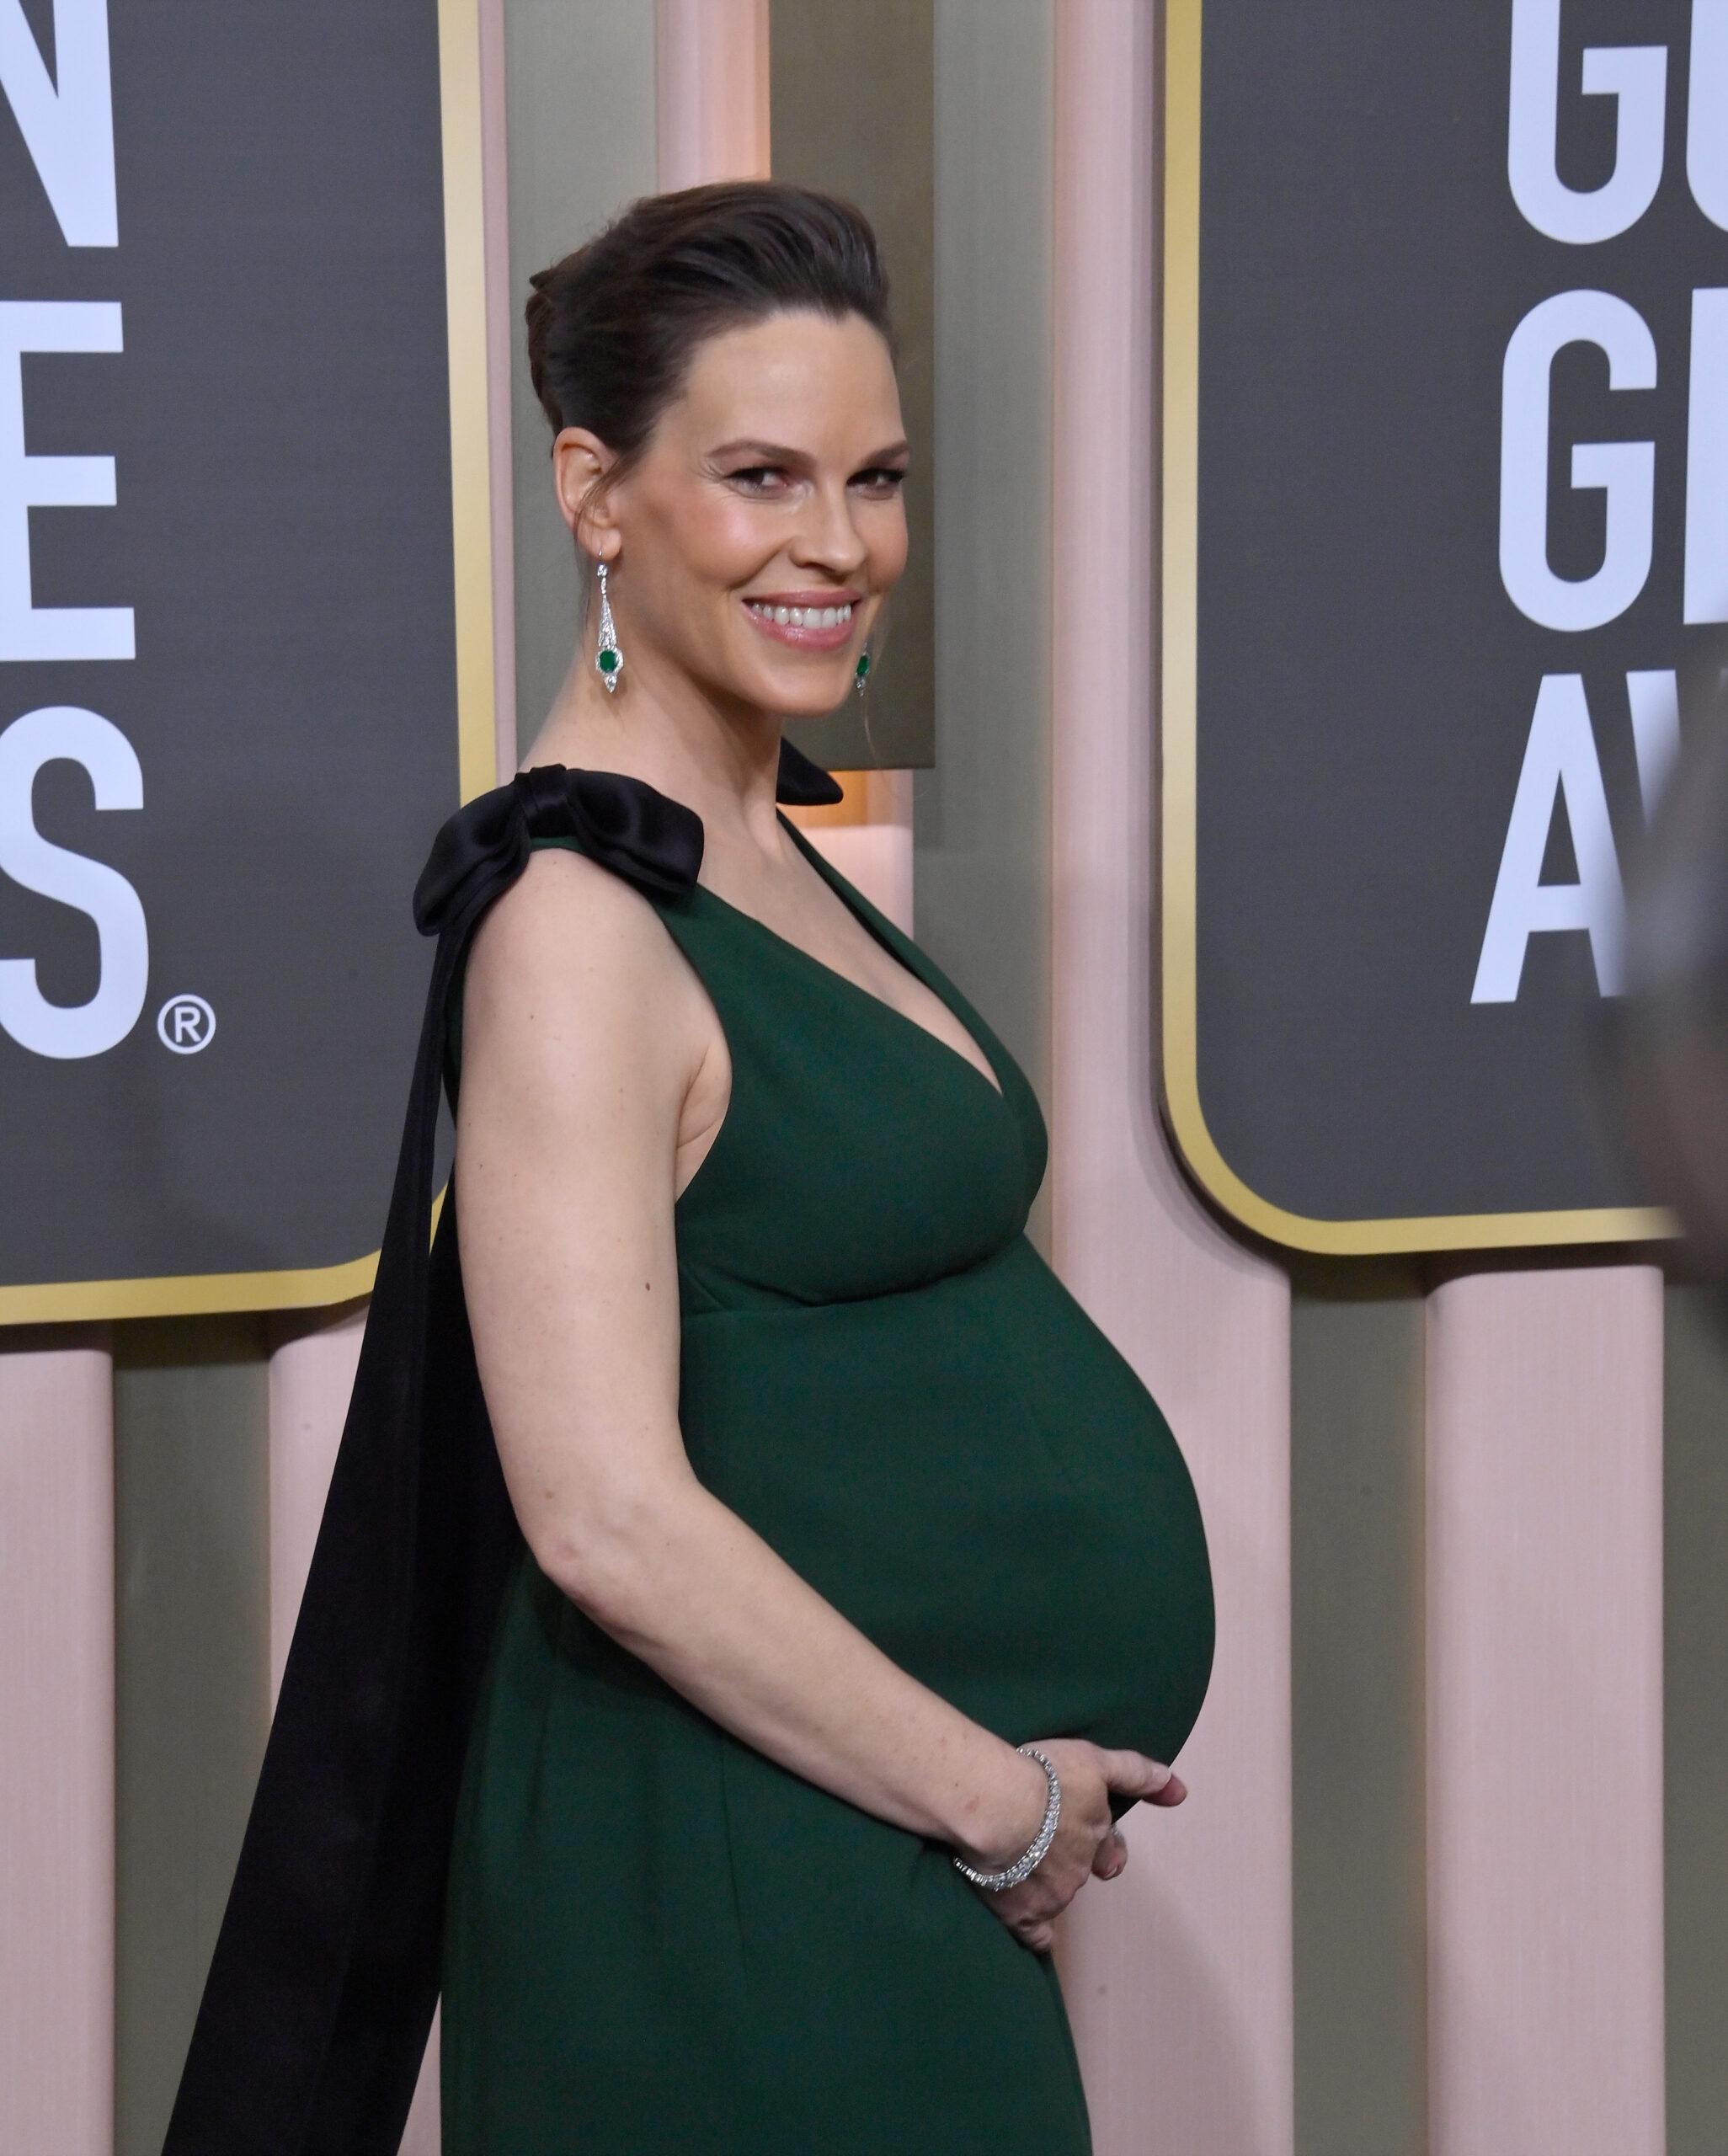 Hilary Swank Attends the Golden Globe Awards in Beverly Hills